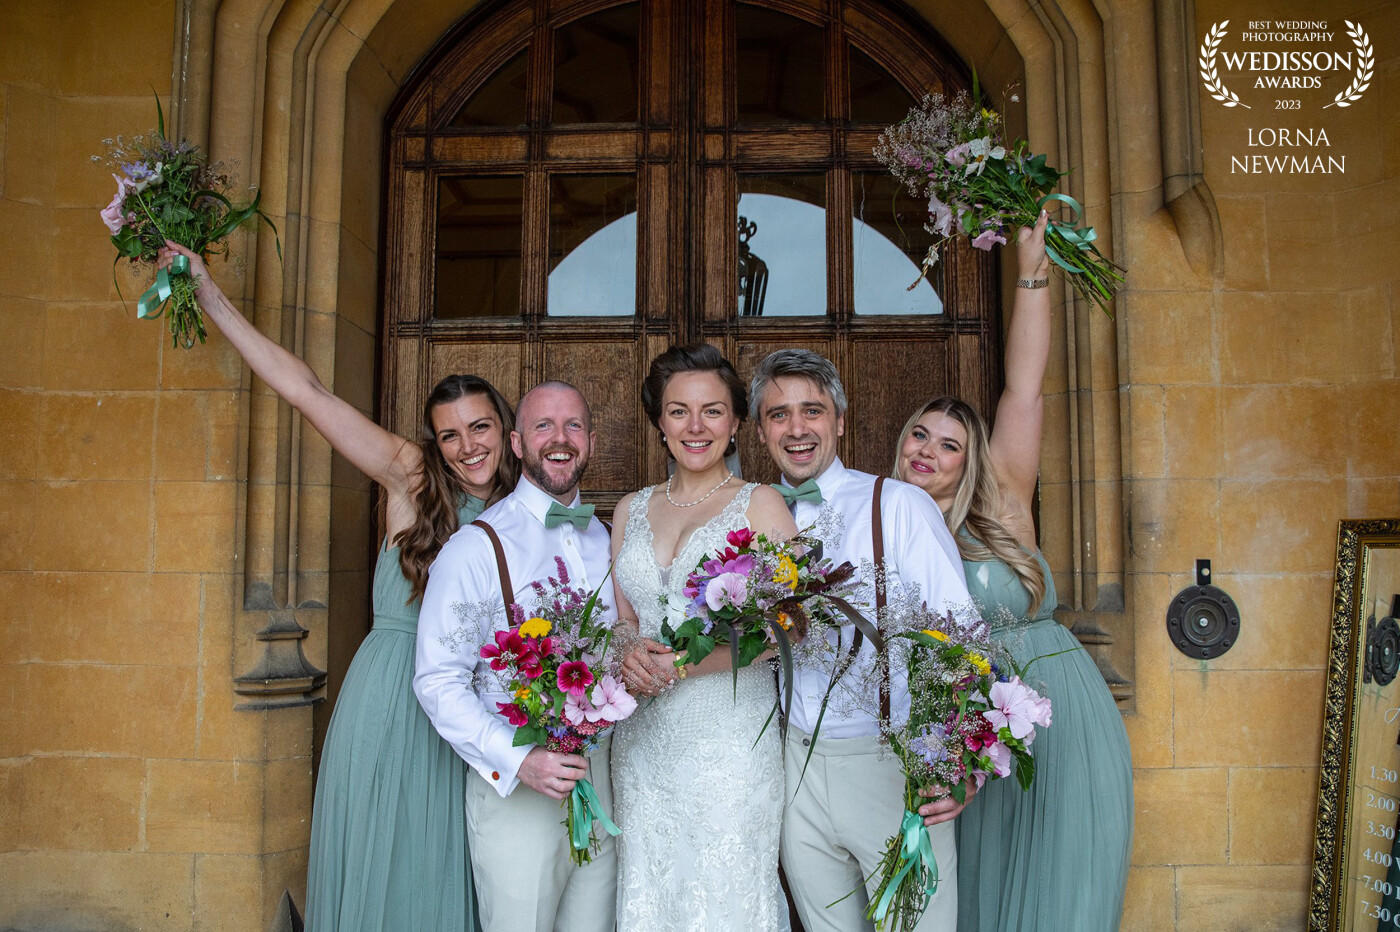 Bride's men can have wedding bouquets too! Lovely Charlotte celebrating with her bridal party at the beautiful Shuttleworth house. Love having fun with the group shots, they do not have be boring at all!